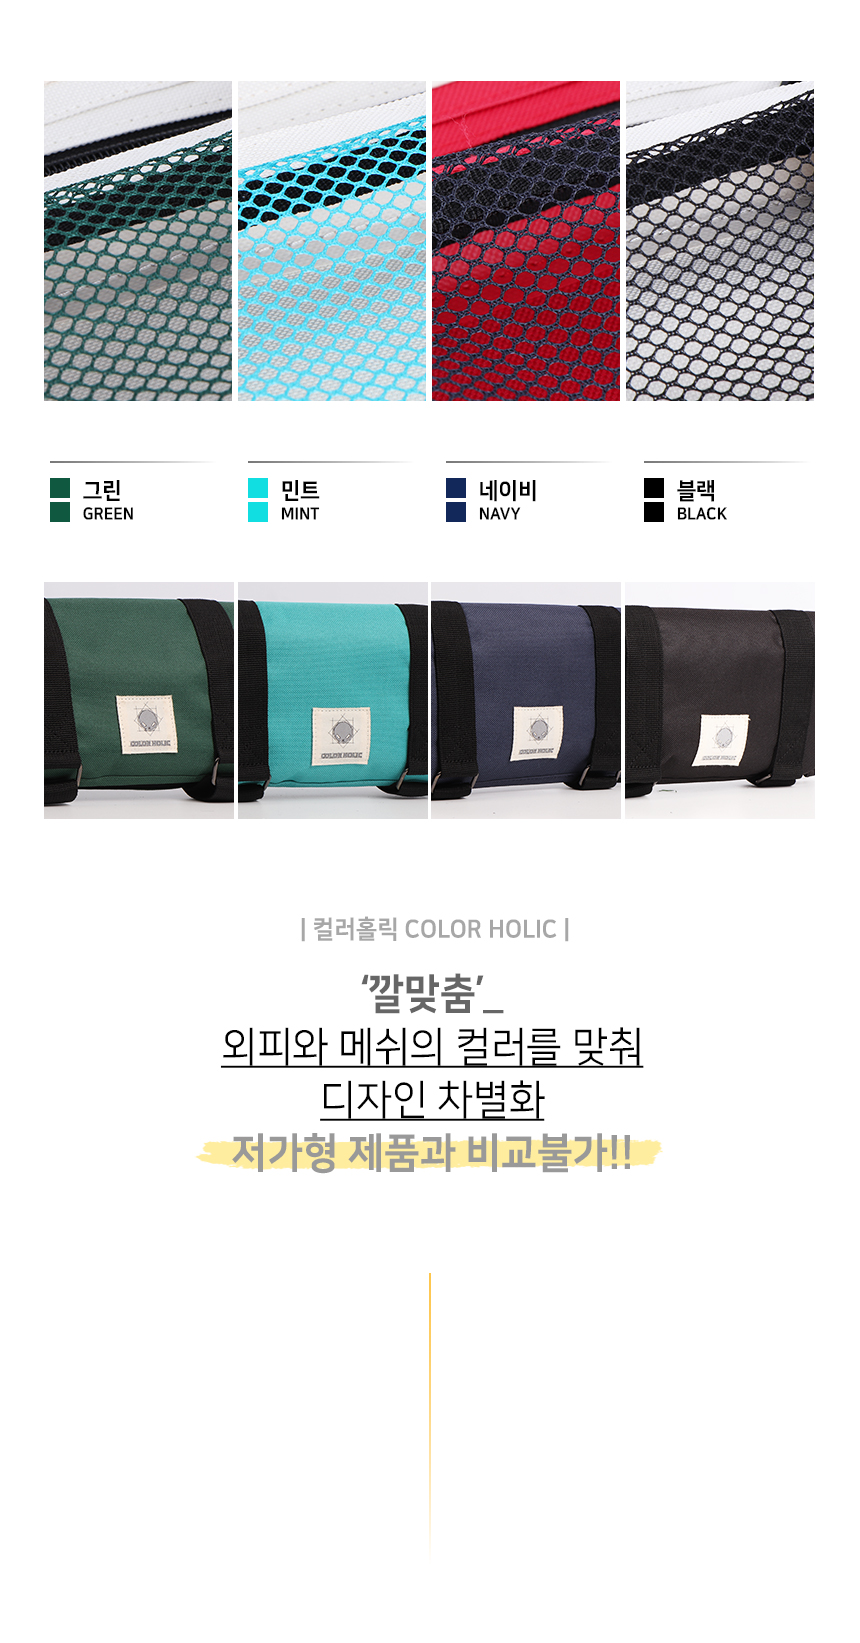 colorholic_golfcart_organizer_pouch_rok_10_page_title_story_box.jpg